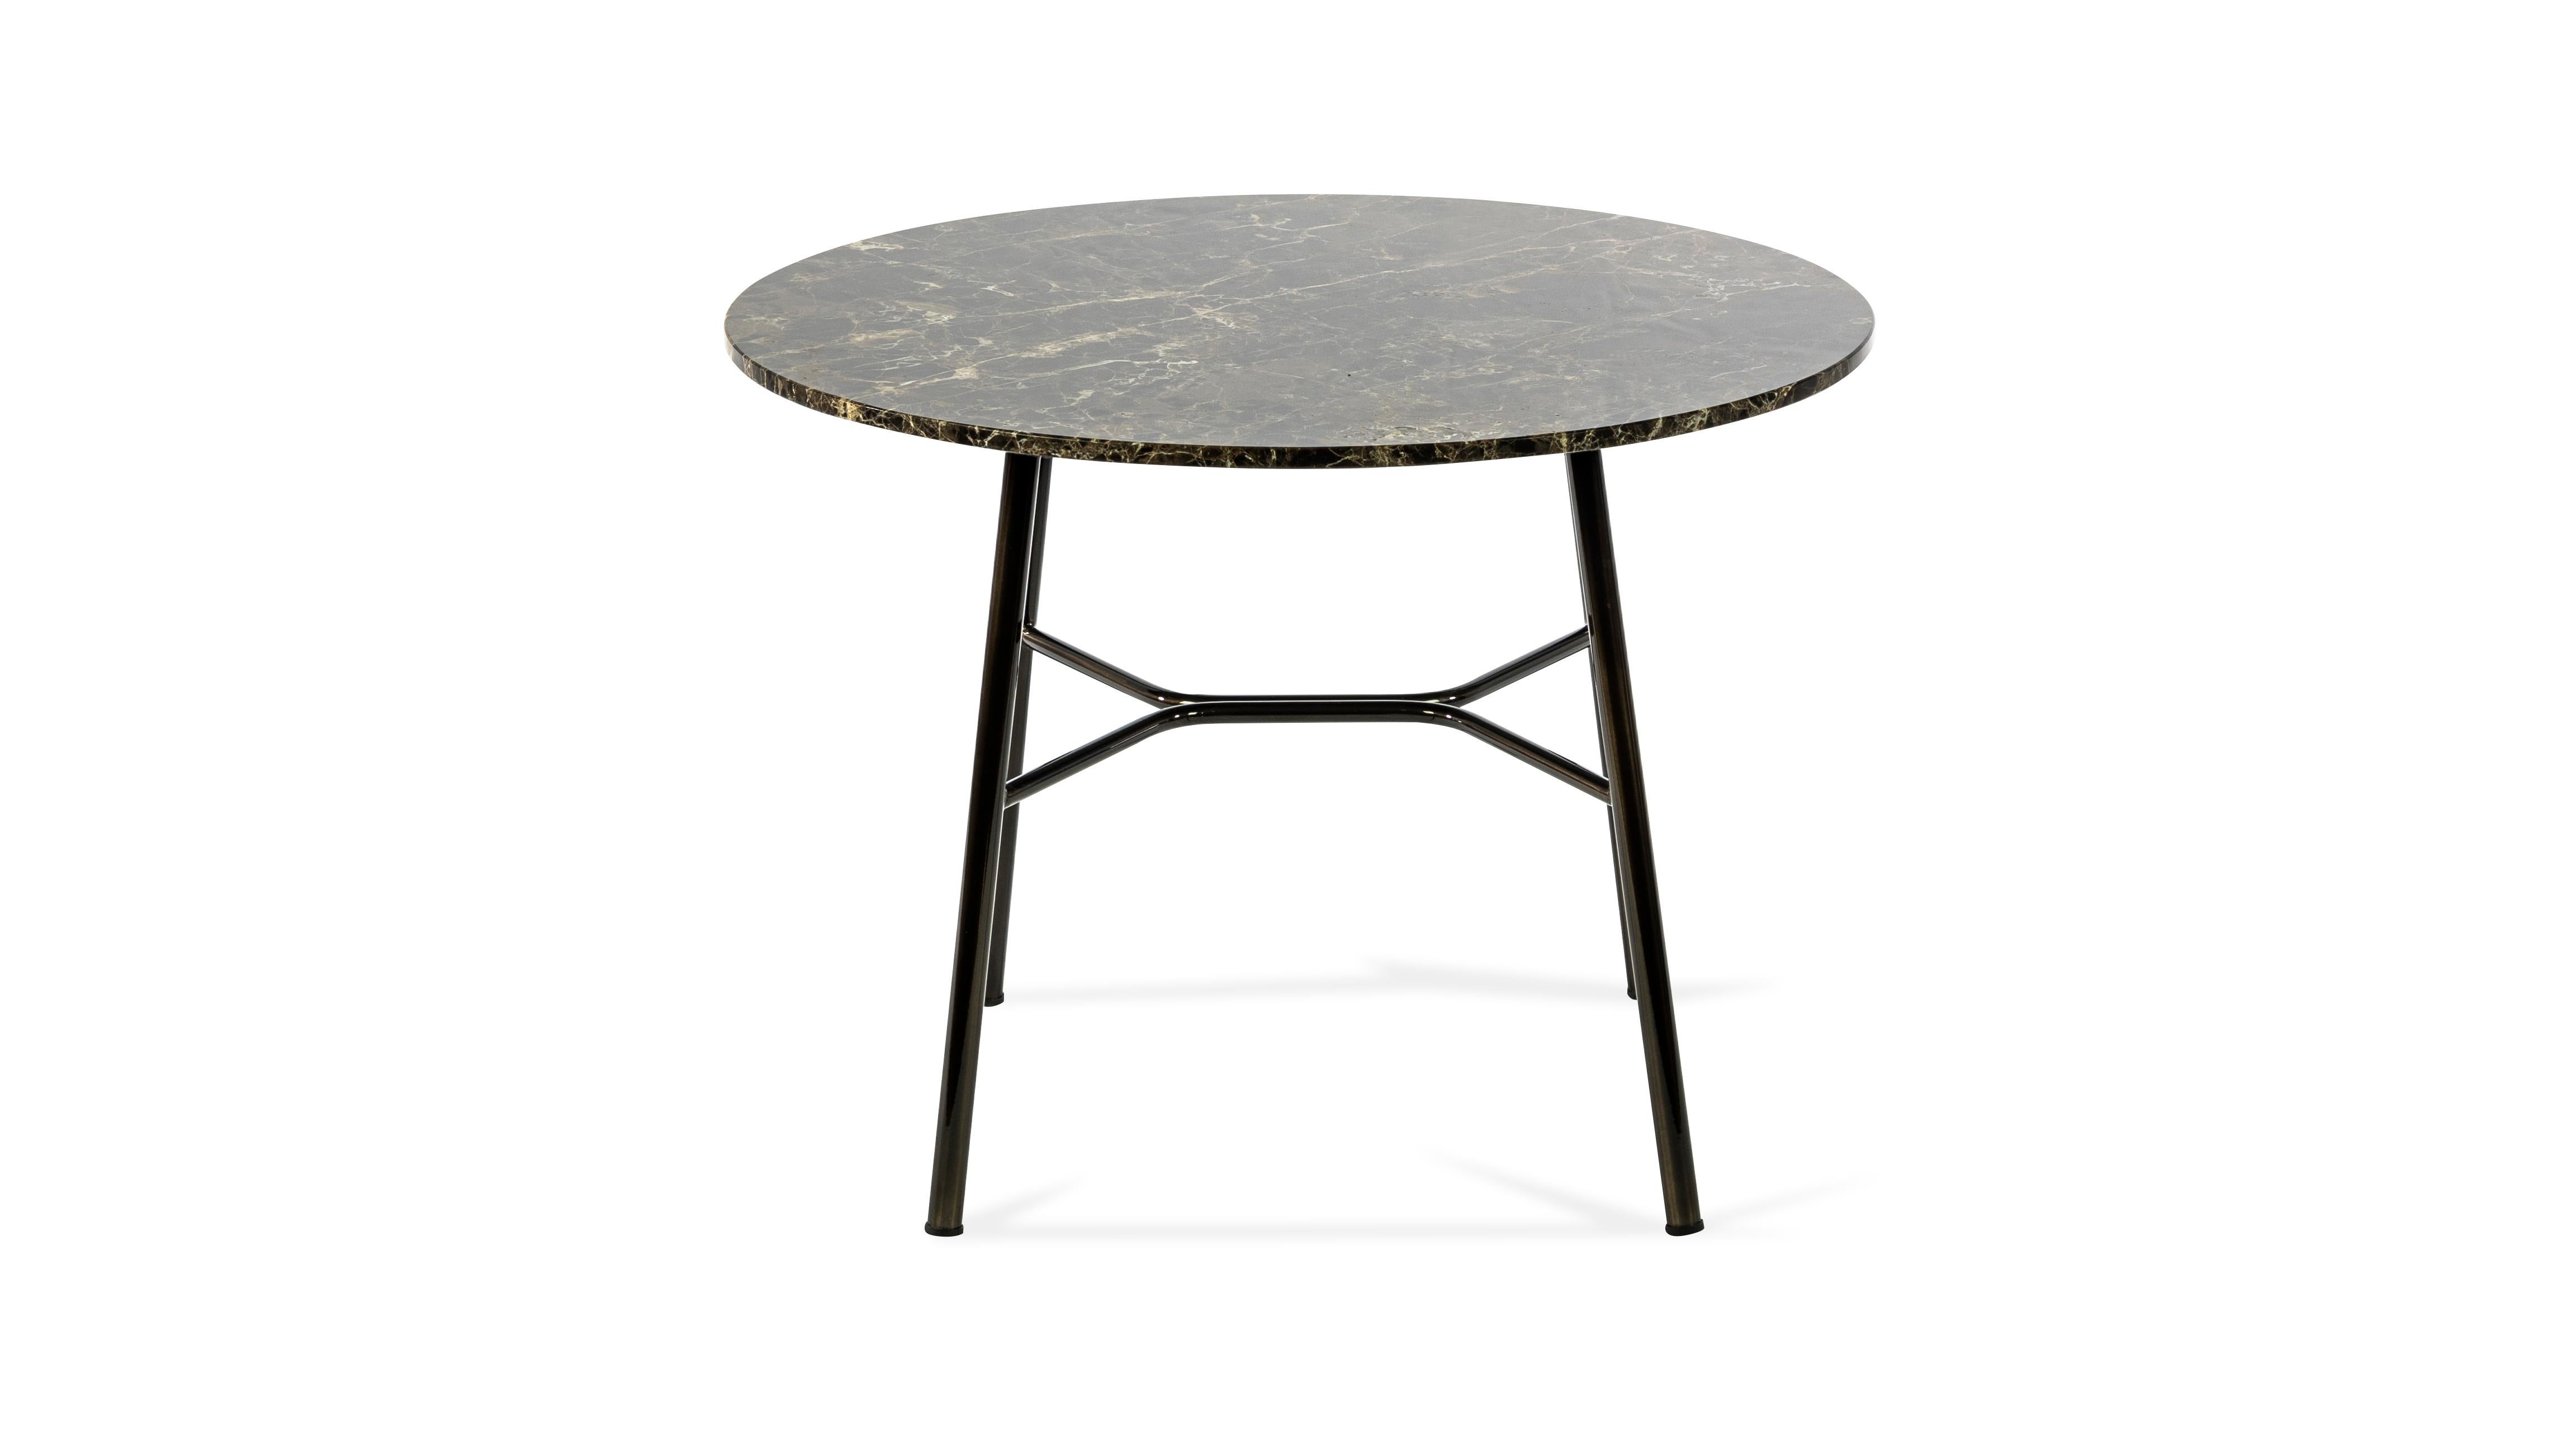 Coffee table, with metal frame, painted in standard or special colors, top available in glass ceramic color brown Emperador marble diameter 50 cm, height 45.
It fits perfectly in a hotel lounge or home environment.